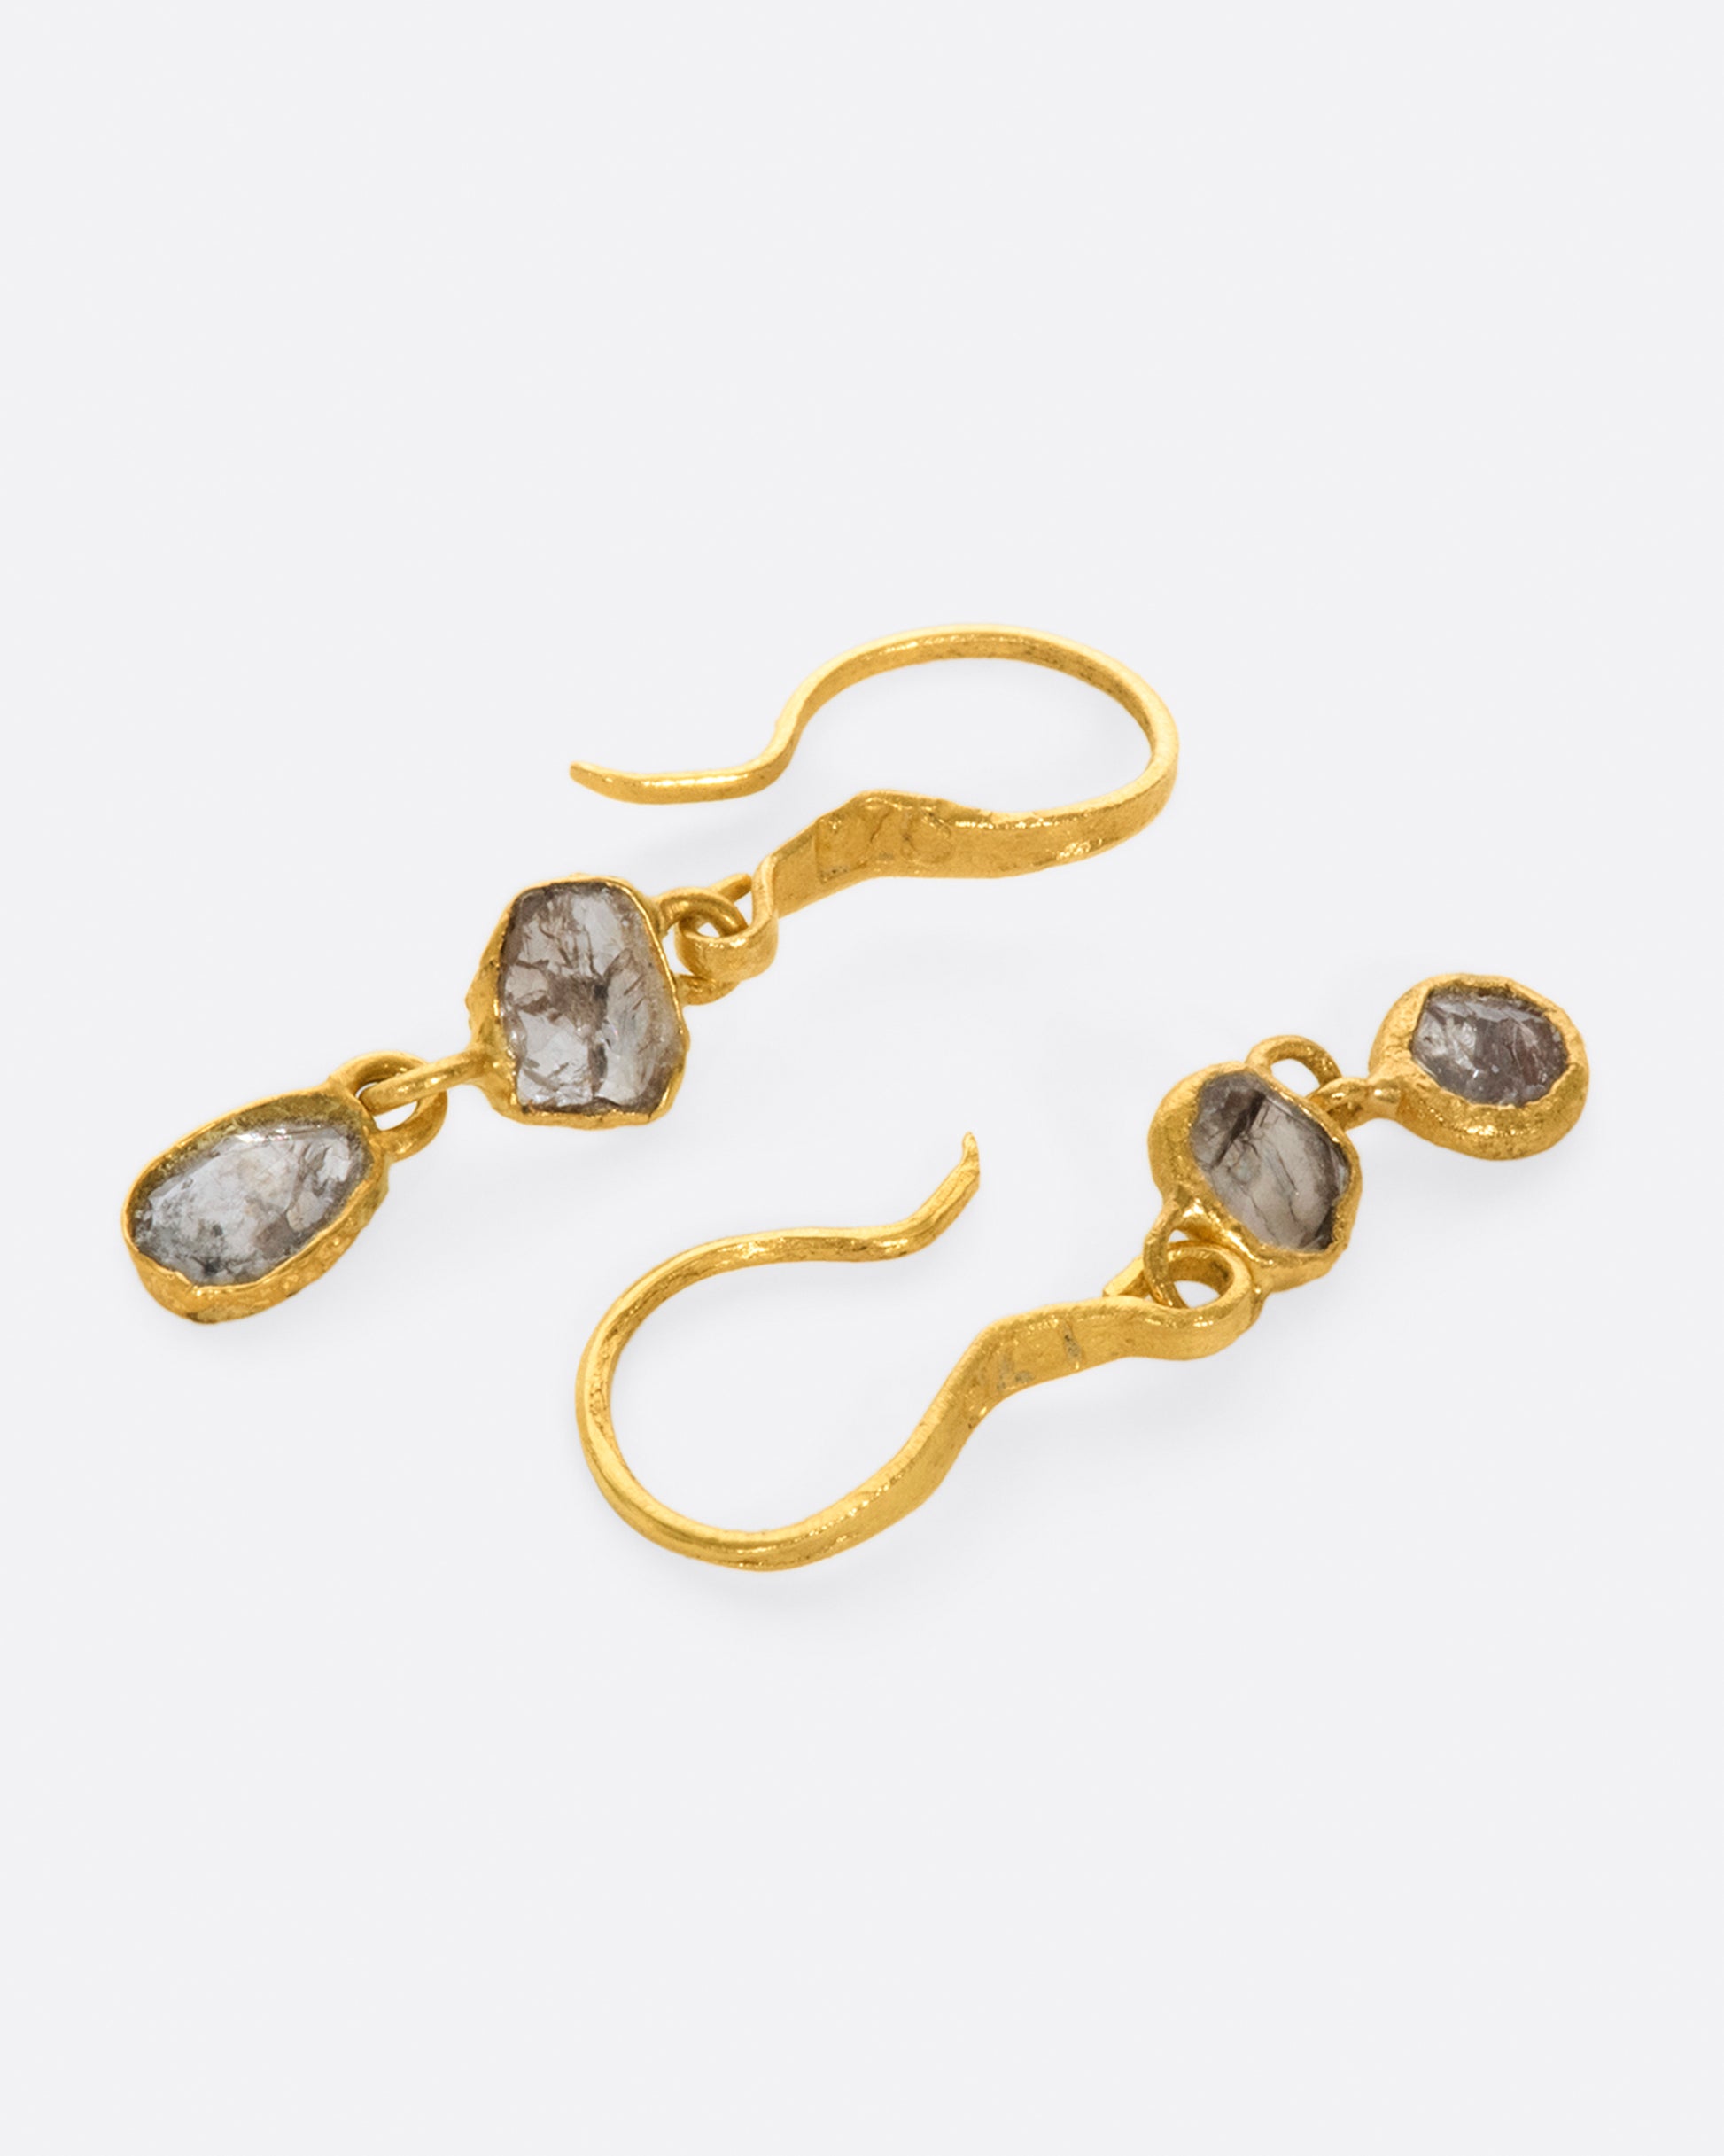 These natural grey Borneo diamond drops are wrapped around their edges in 22k gold, so you can see the unique, asymmetrical stones from both sides.